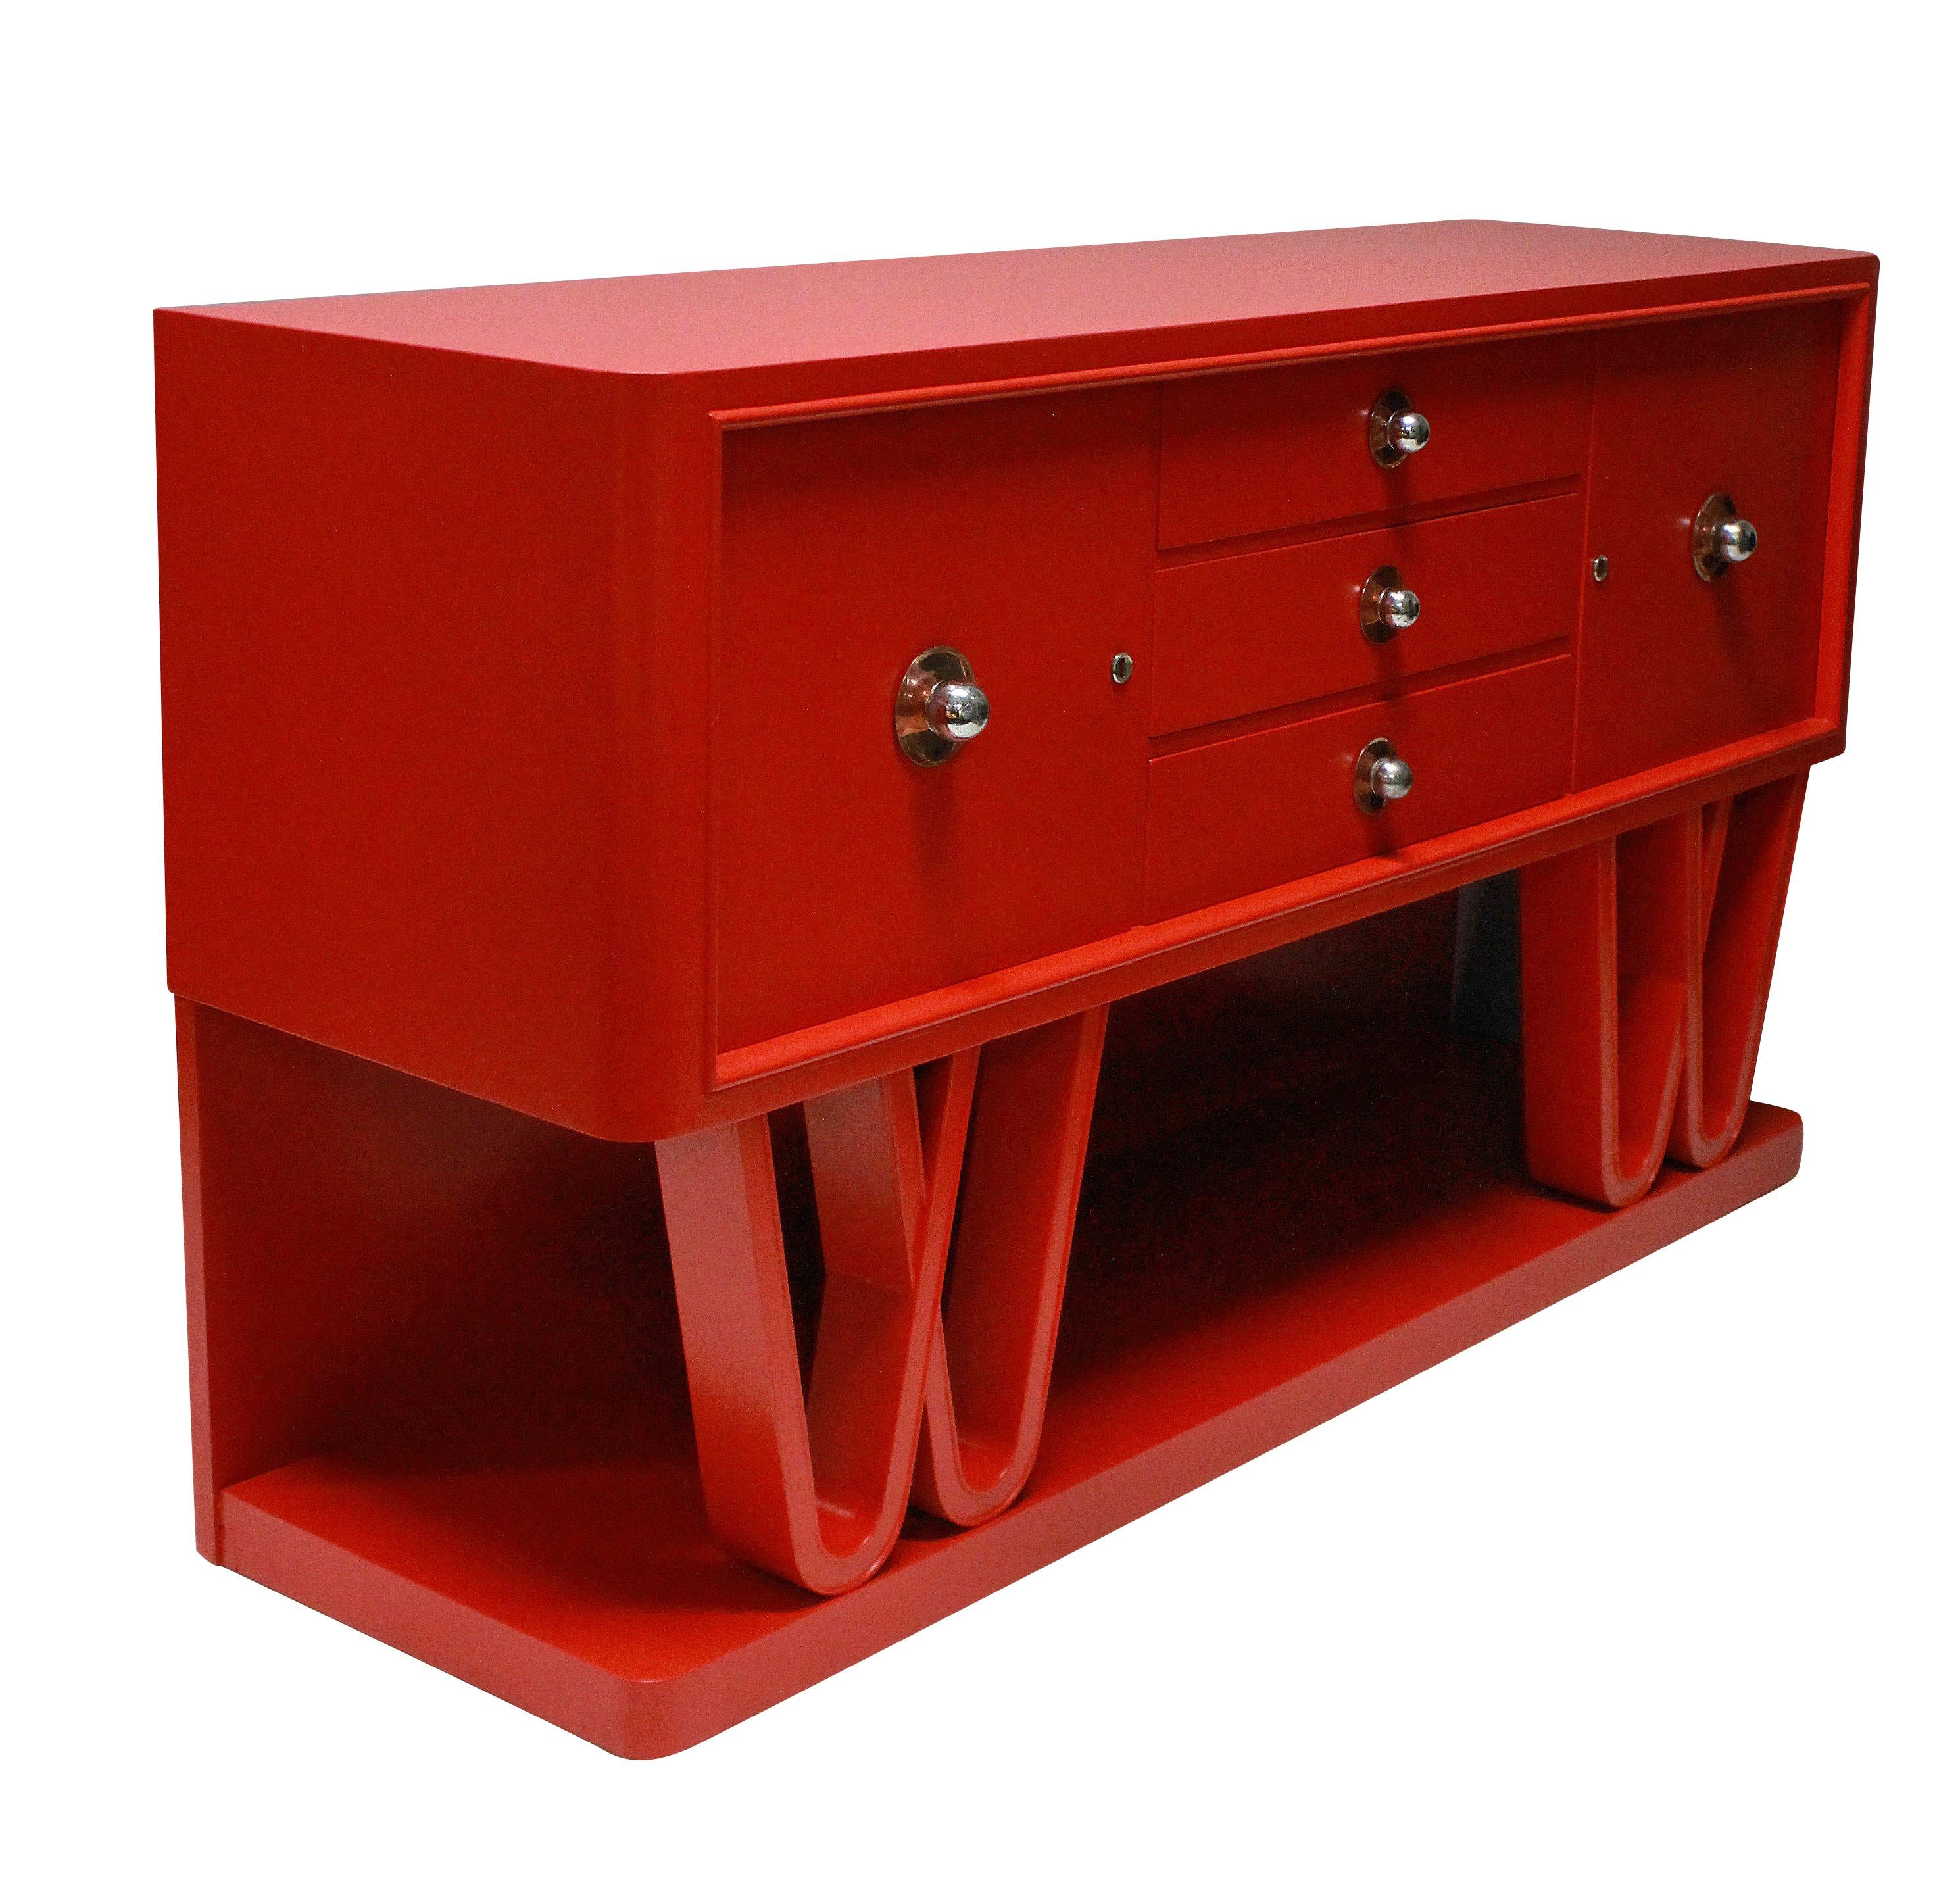 A stunning Italian midcentury credenza in scarlet lacquer, two cupboards and three drawers sit upon an attractive scrolled base. The handles of copper and chrome and the cupboards are lockable.